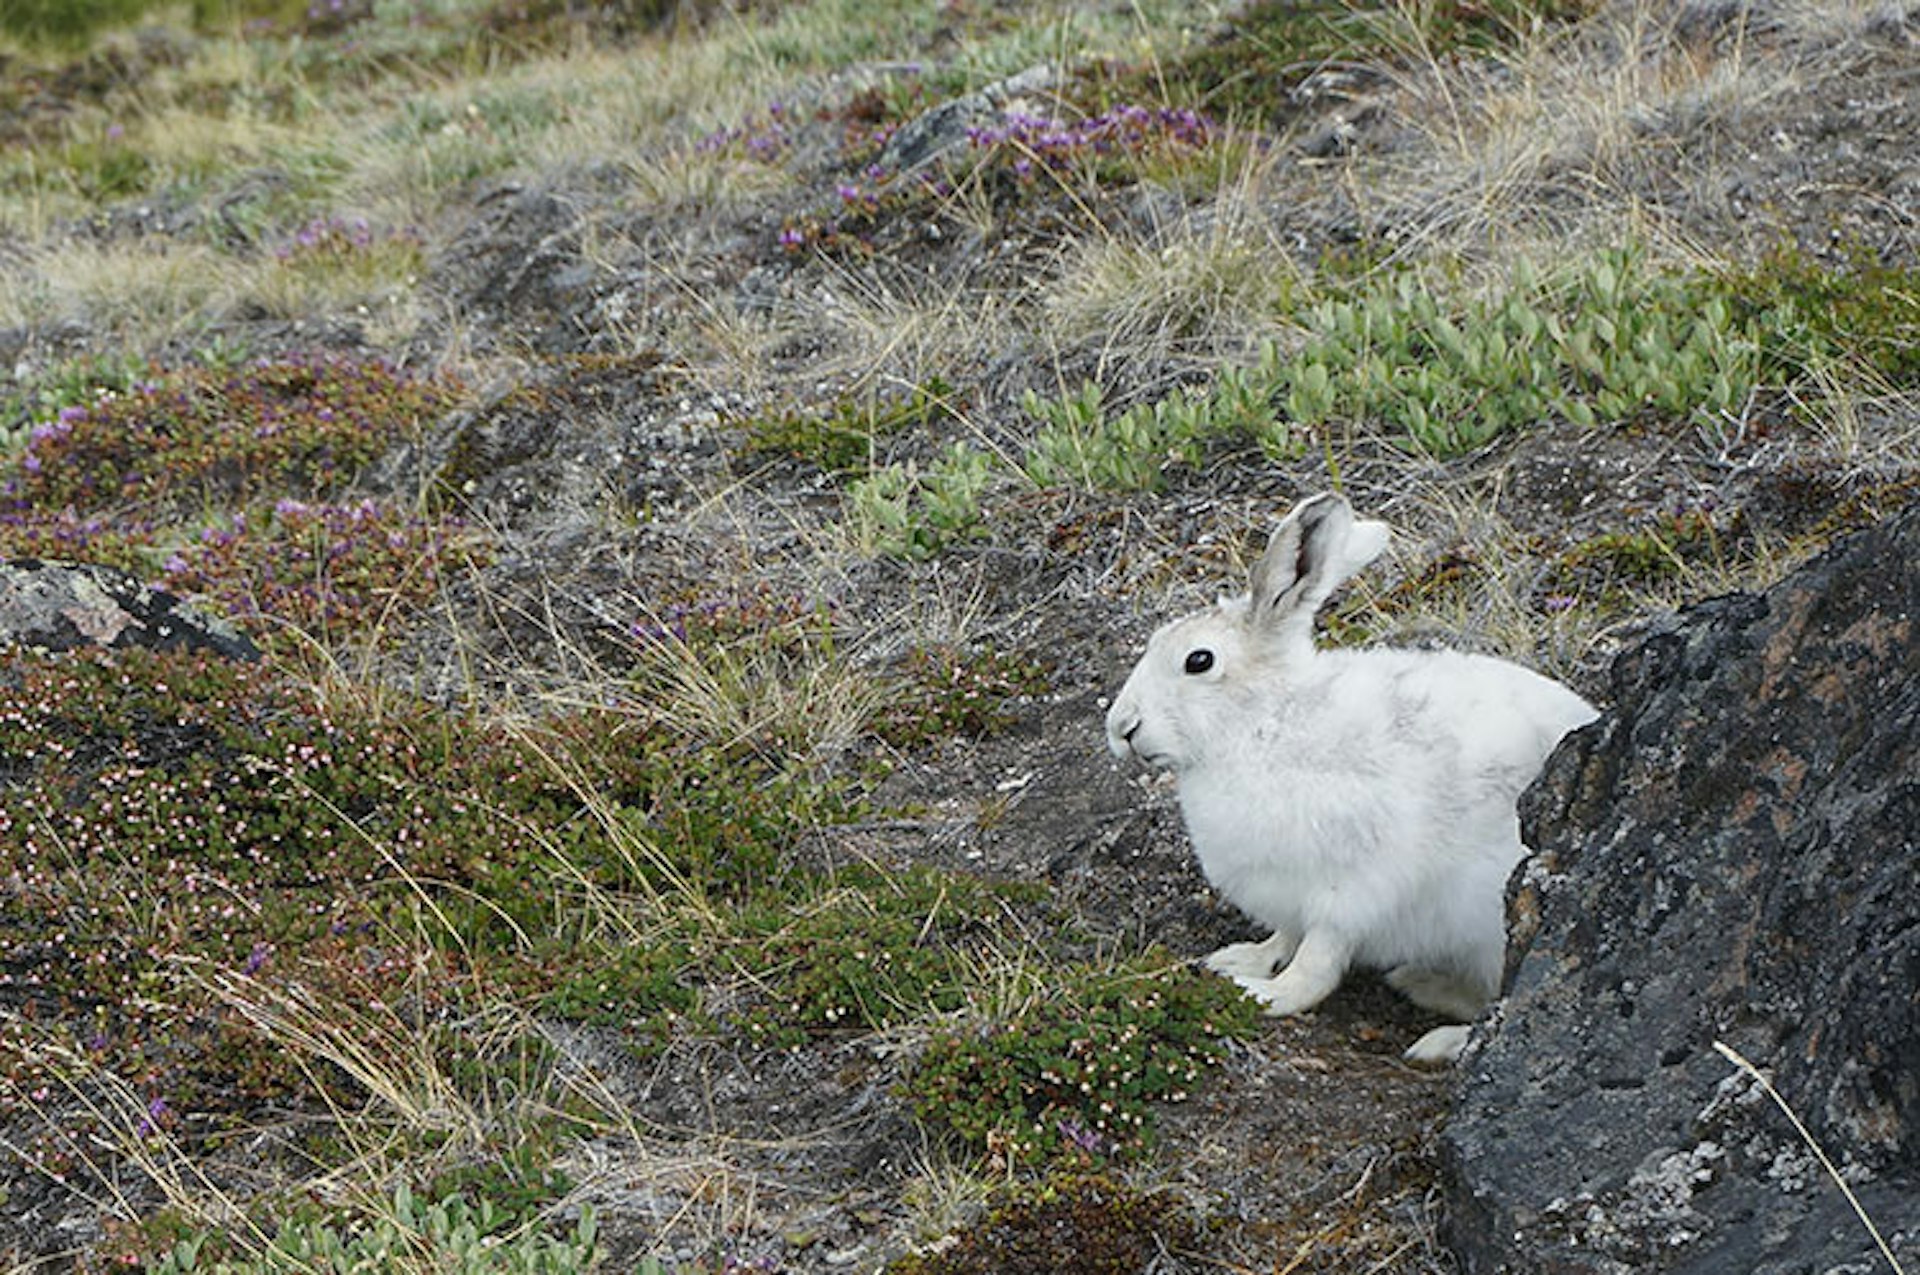 A beady-eyed Arctic hare in the grasslands around Kangerlussuaq, before he bolted the author's eager camera lens. Image by Anita Isalska / Lonely Planet